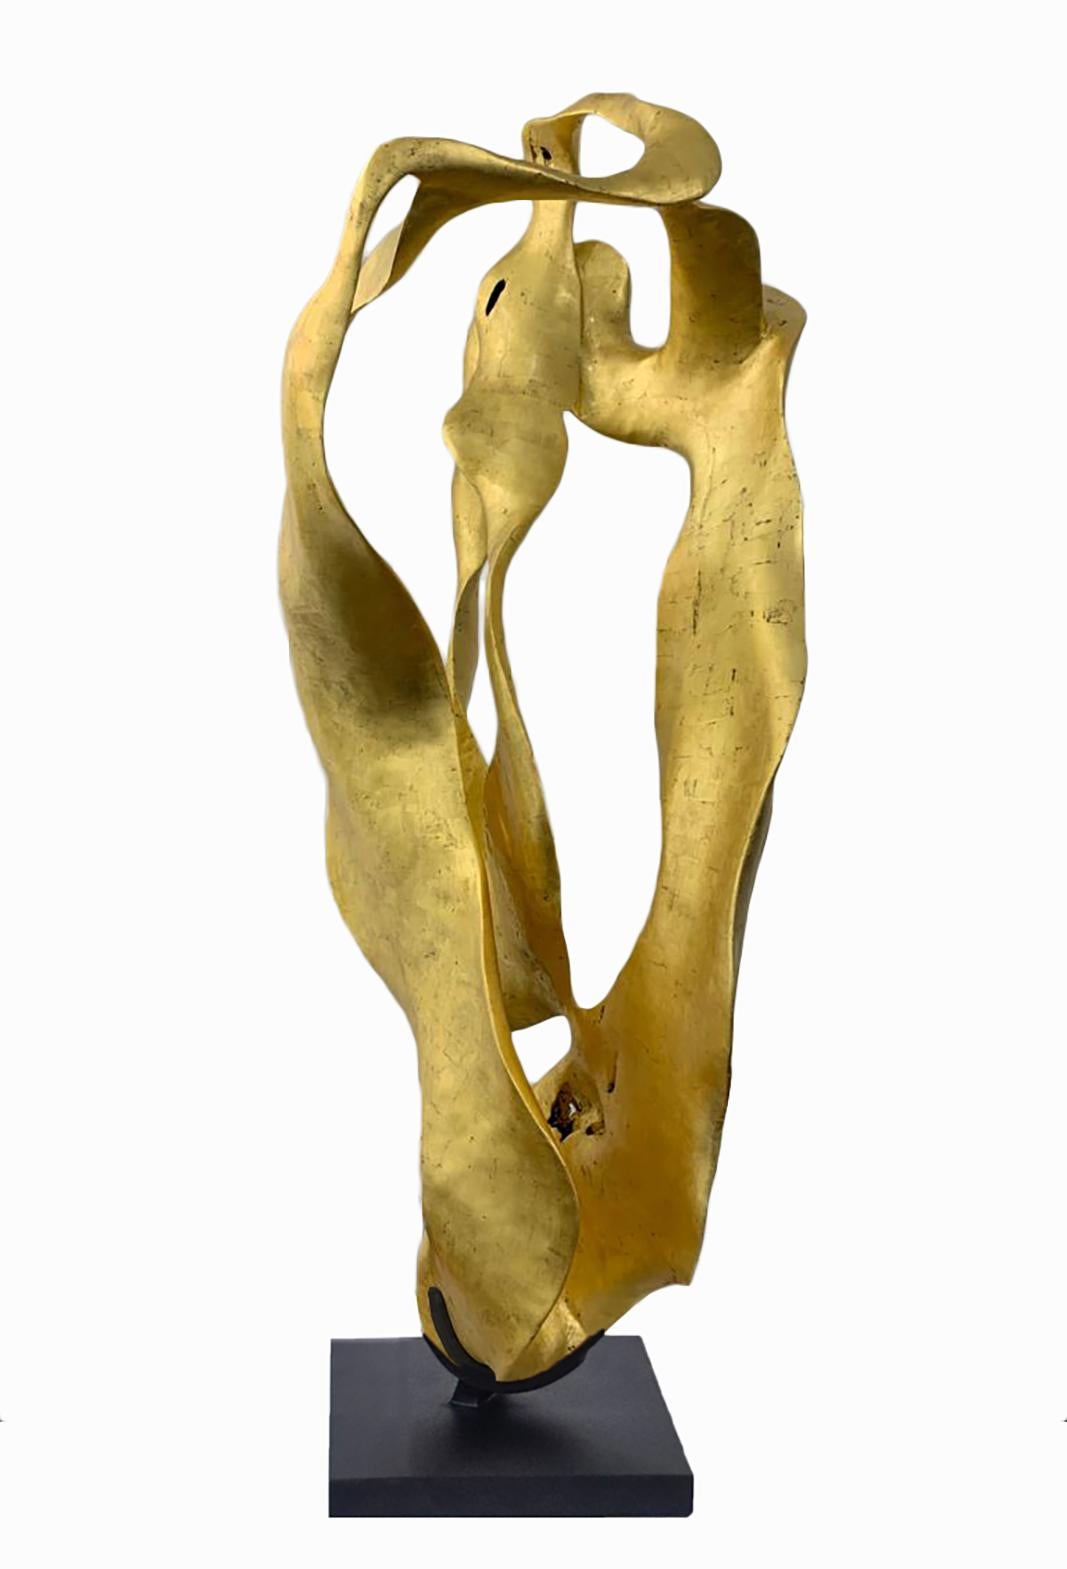 Mahogany root sculpture with gold leaf

The Joaquim Ingravidesa Sculpture Alliance is formed by an international group of sculptors and designers who collaborate to create abstract sculpture inspired by nature. They often work together for months on